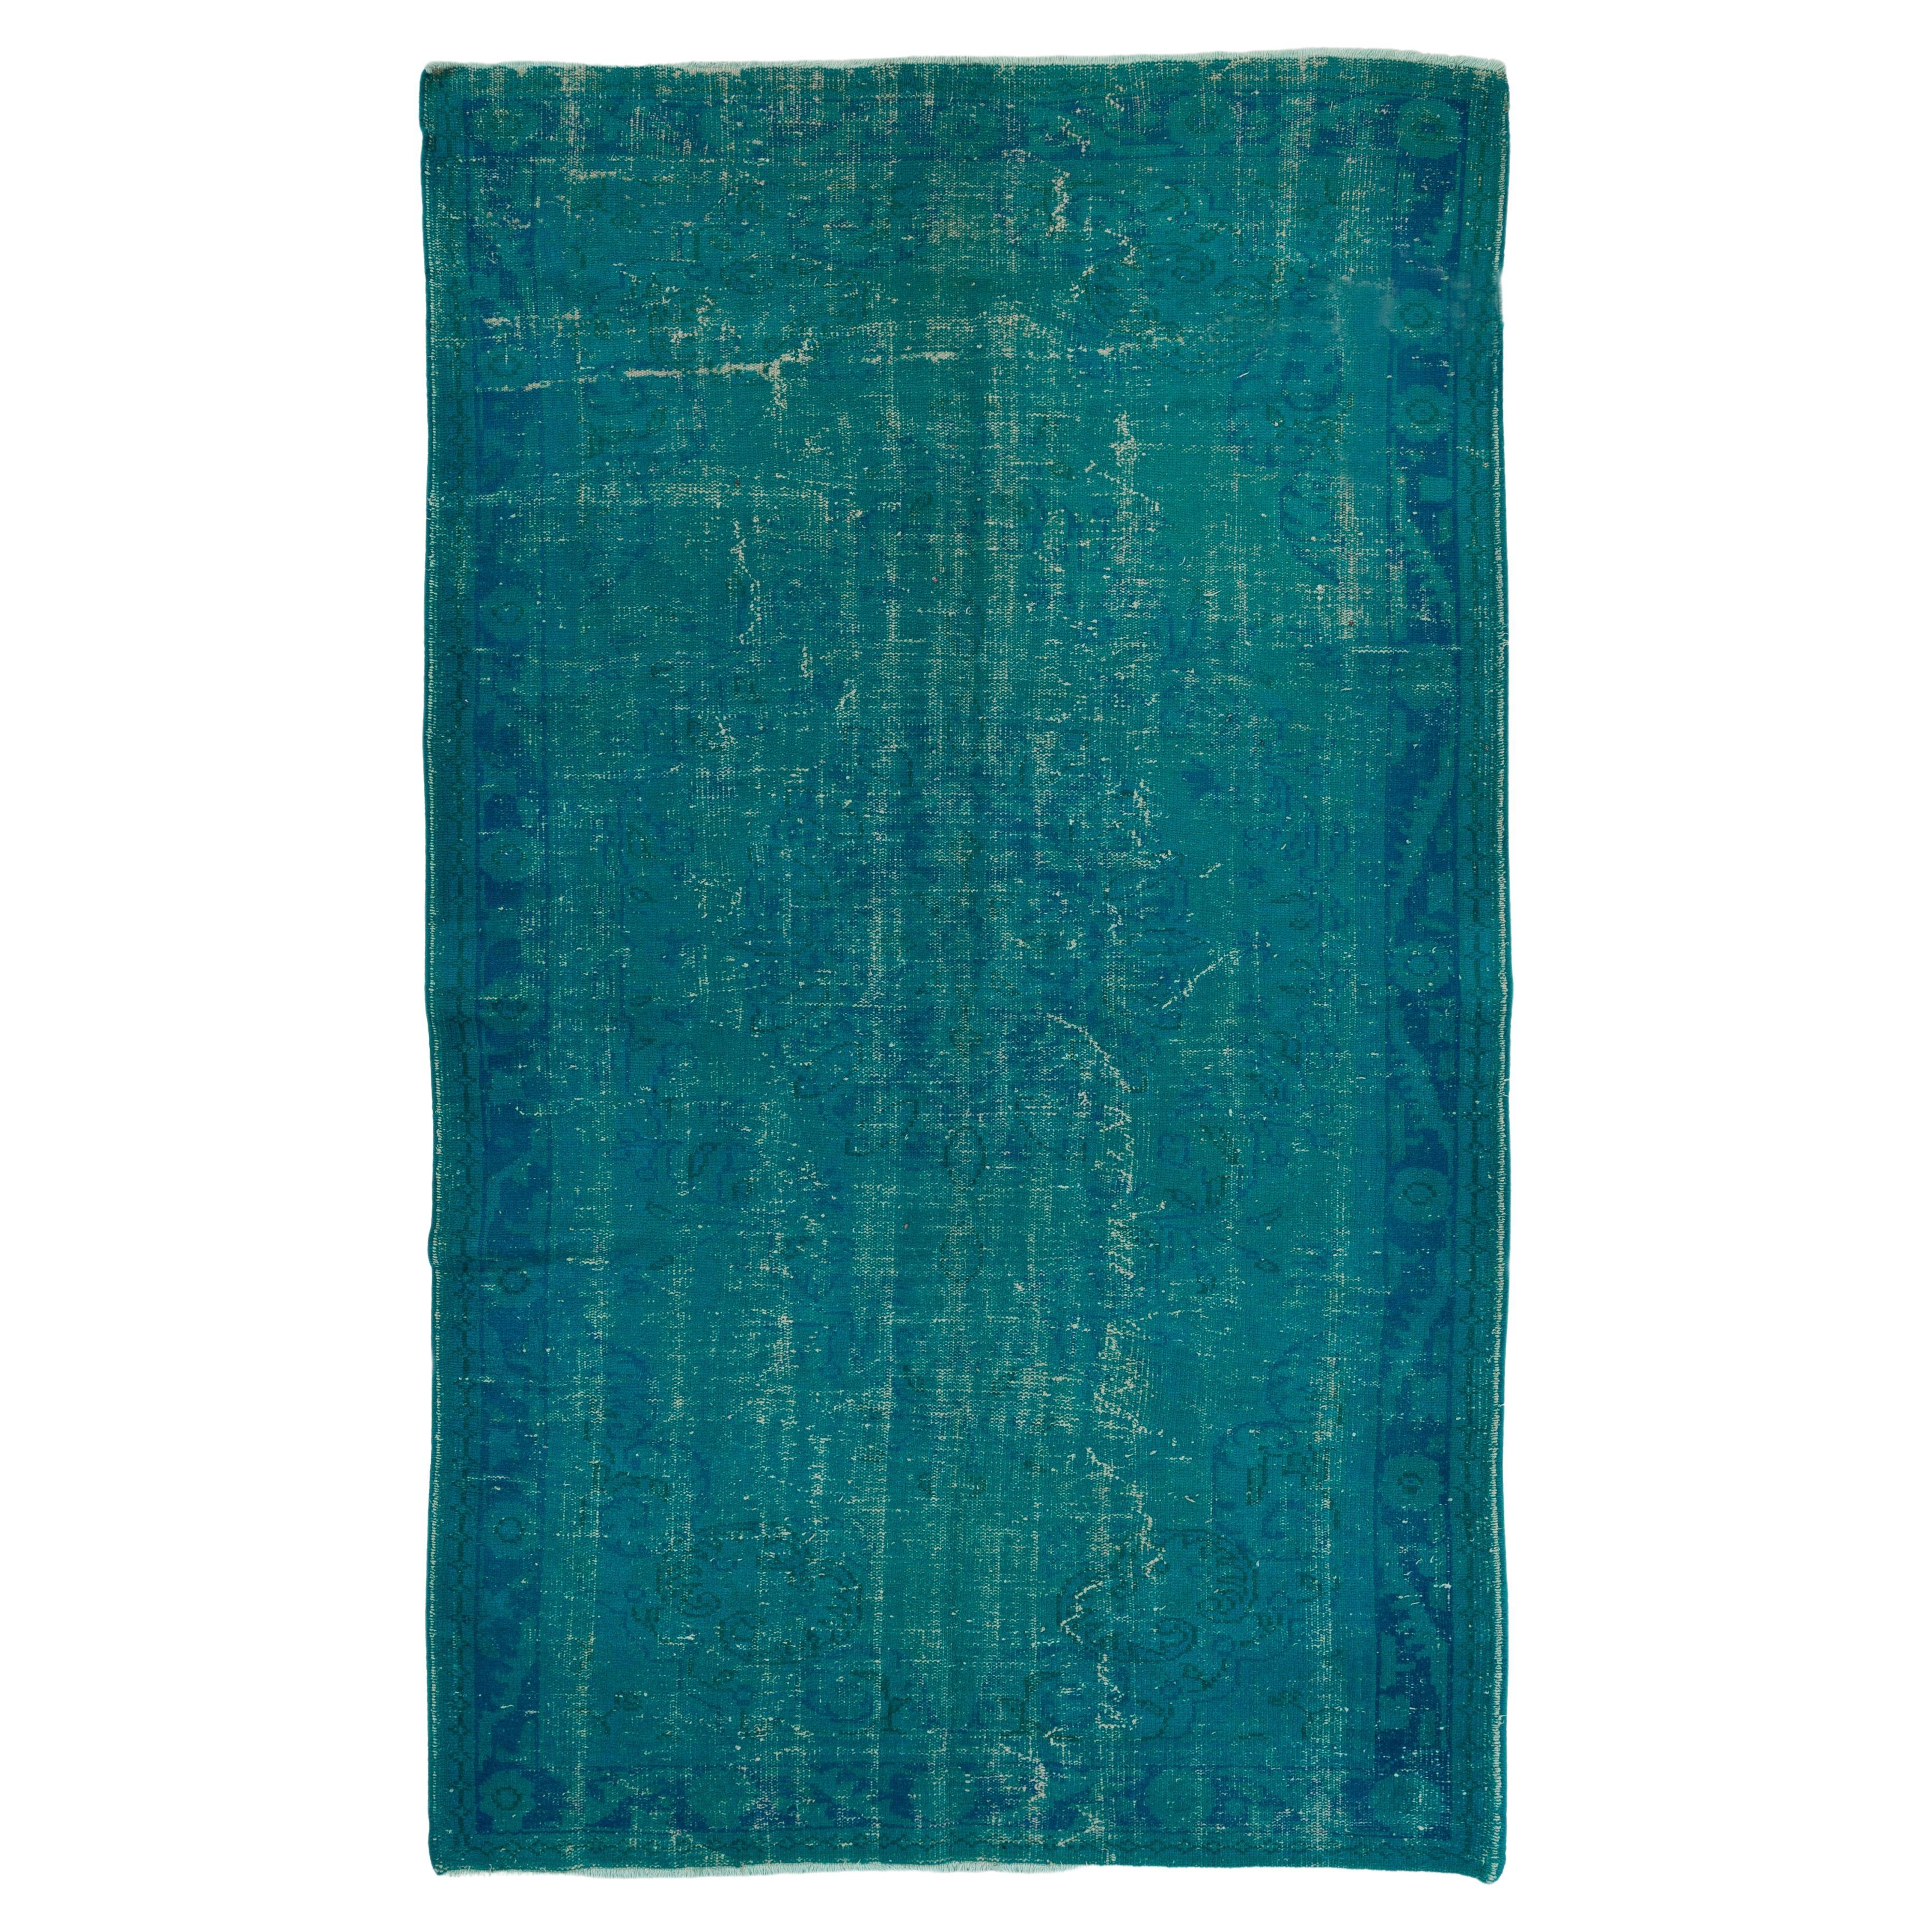 6.2x10.4 Ft Vintage Handmade Turkish Rug Over-dyed in Teal for Modern Interiors